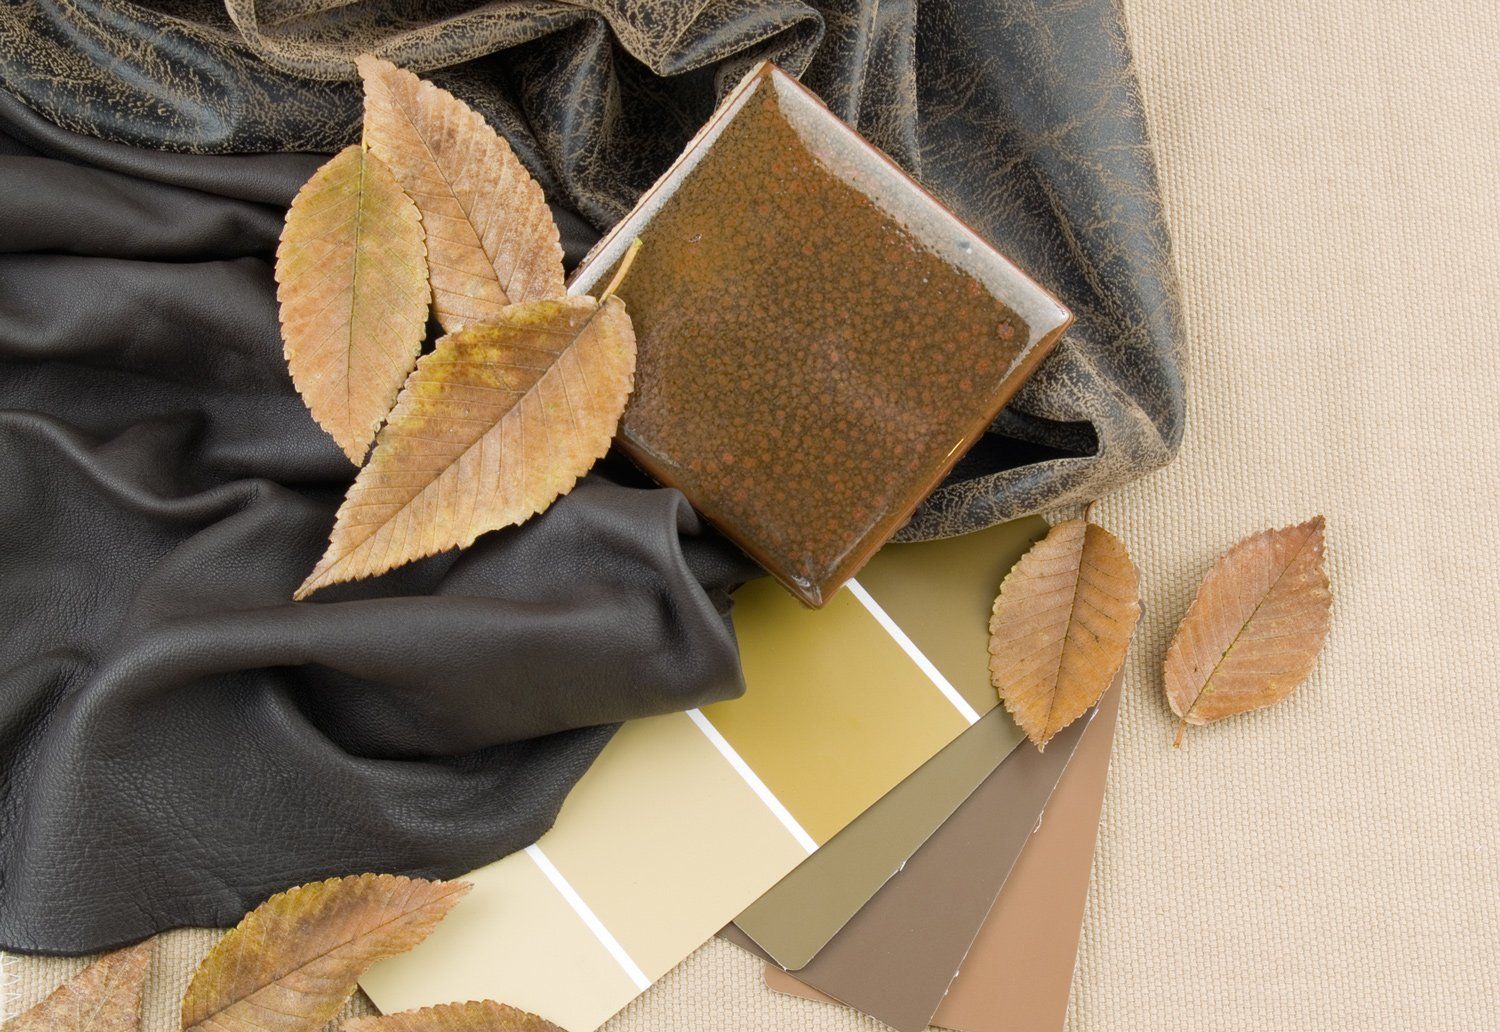 4 Benefits of Working with a Color Expert When Painting Your Home